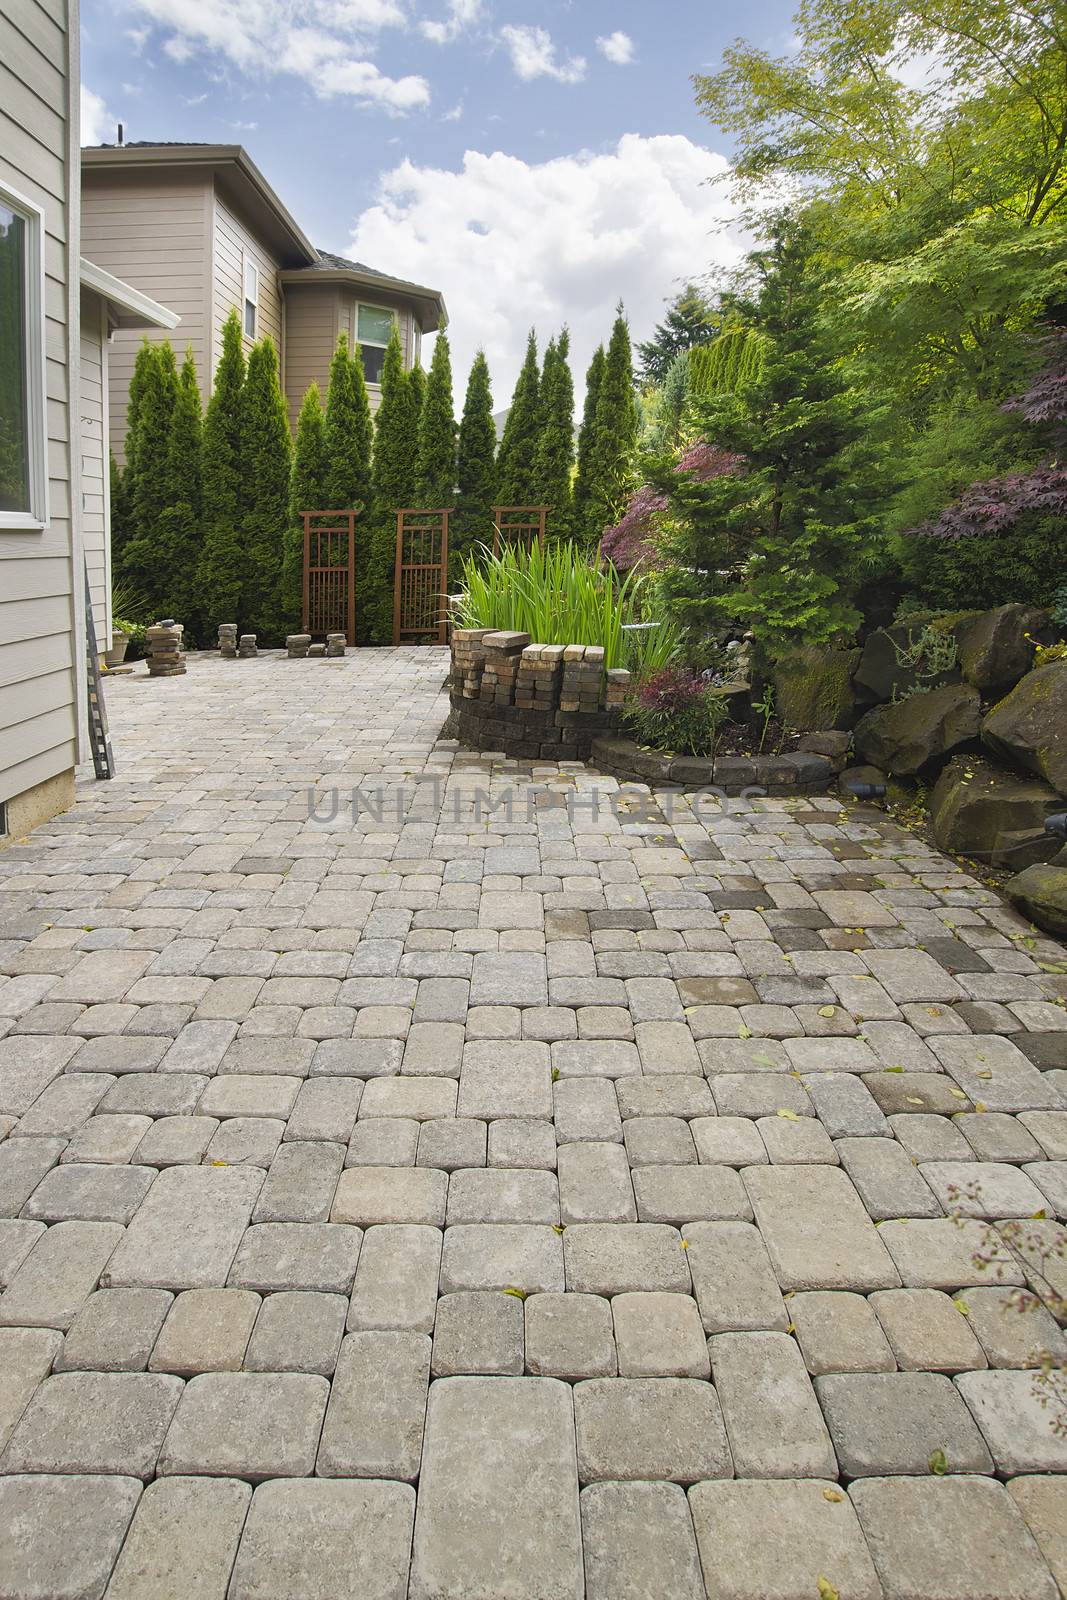 Garden Backyard Hardscape Brick Pavers Patio with Pond Trees Natural Rocks Landscaping